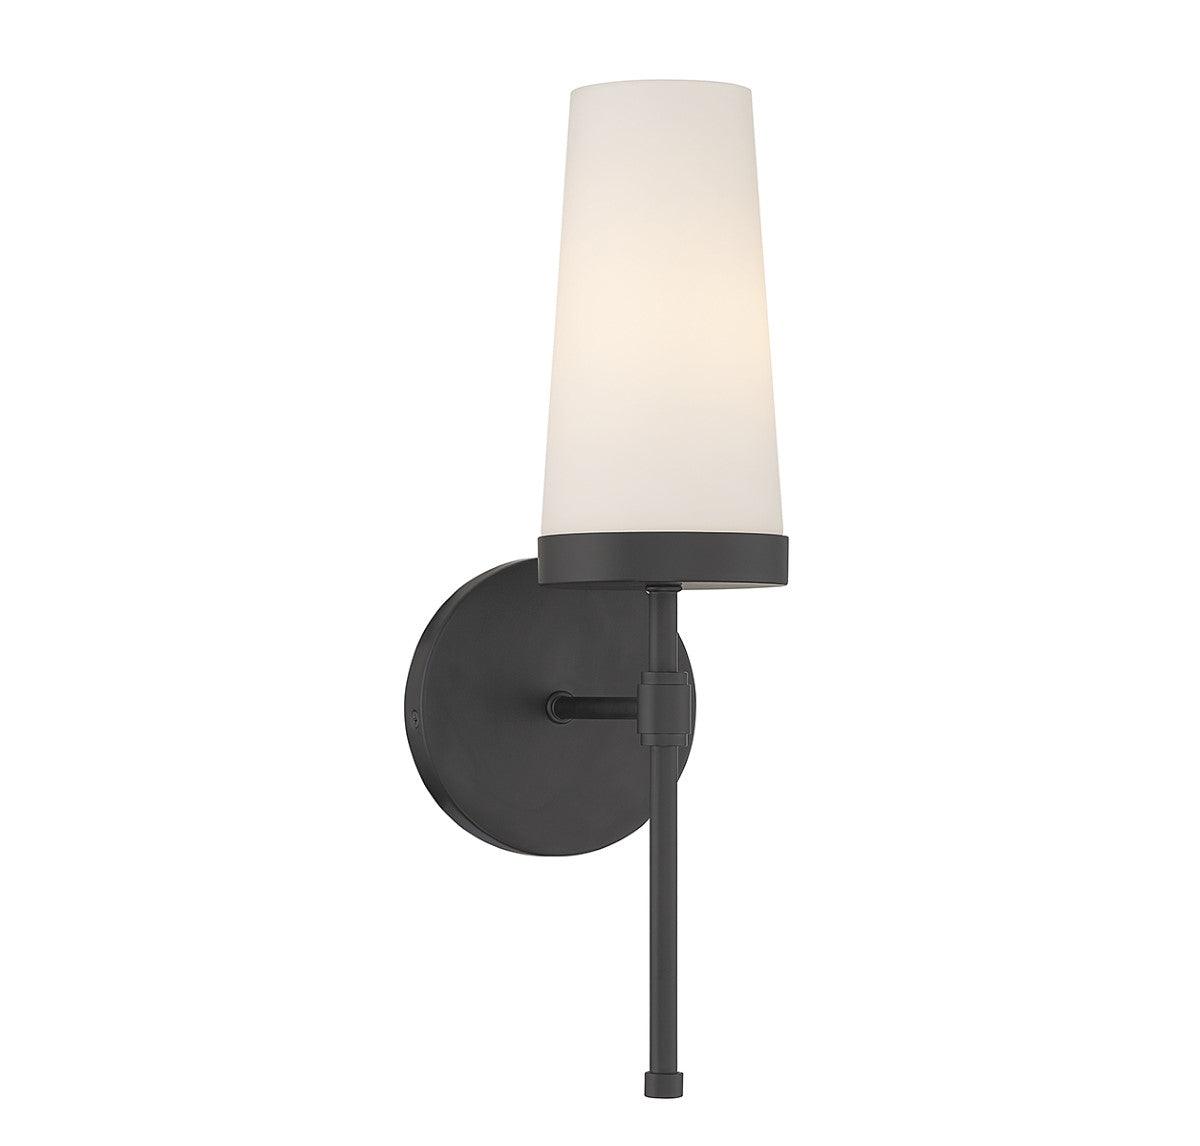 Haynes 16 in. Wall Sconce